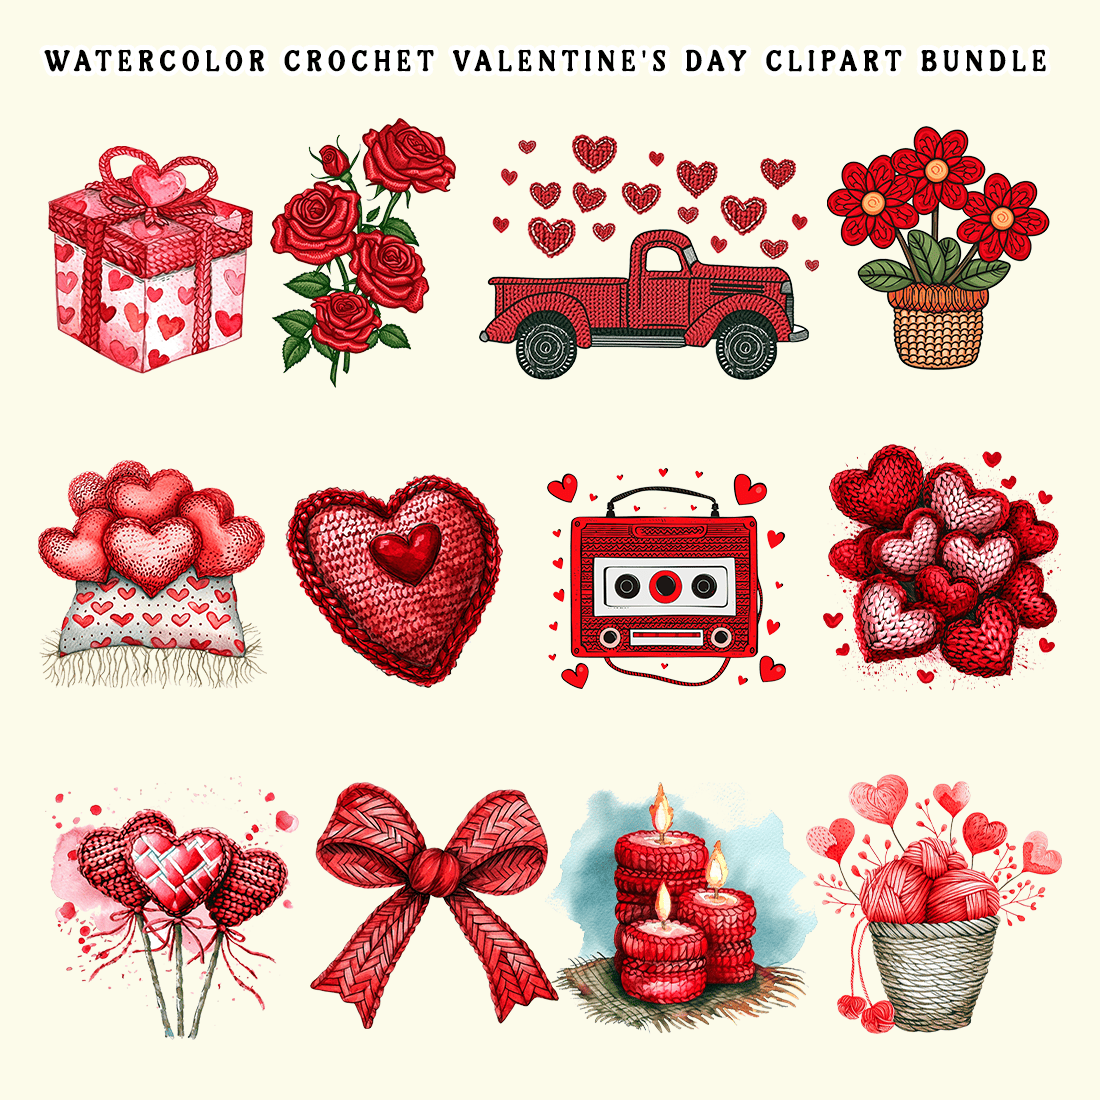 Watercolor Crochet Valentine's Day Sublimation Clipart preview image.